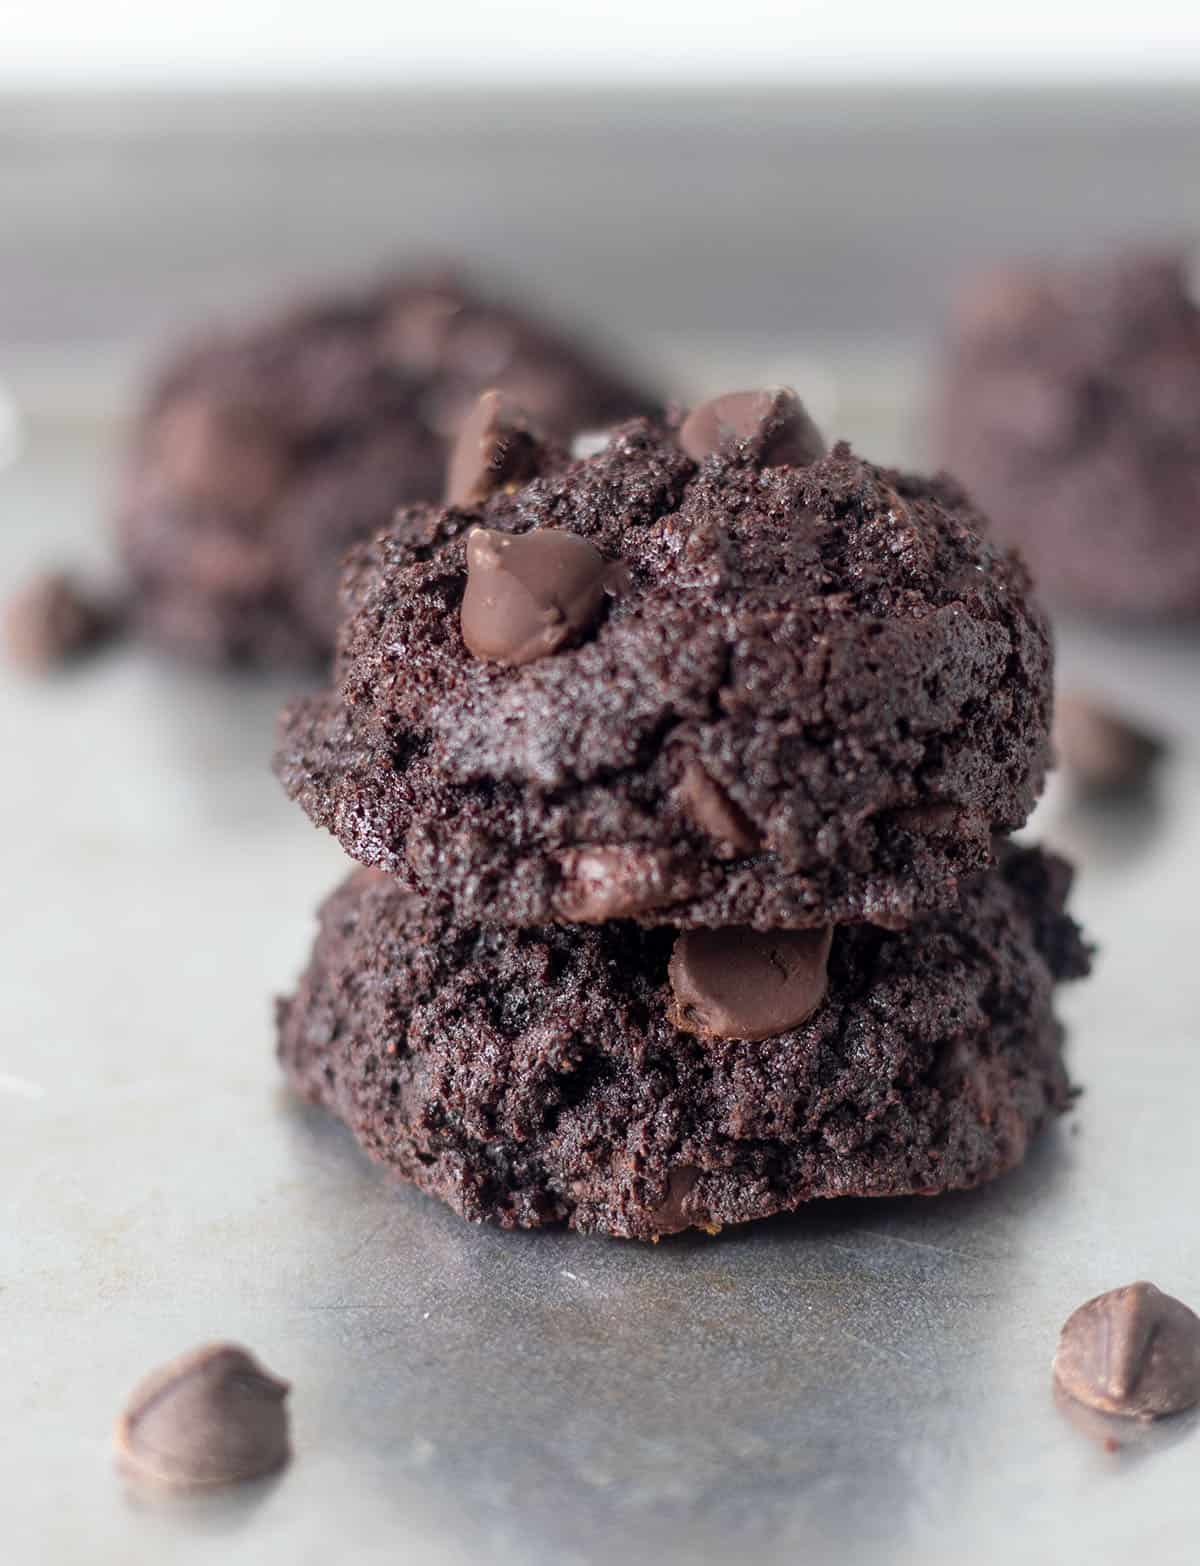 two chocolate coconut flour cookies stacked on top of each other on a silver baking pan.